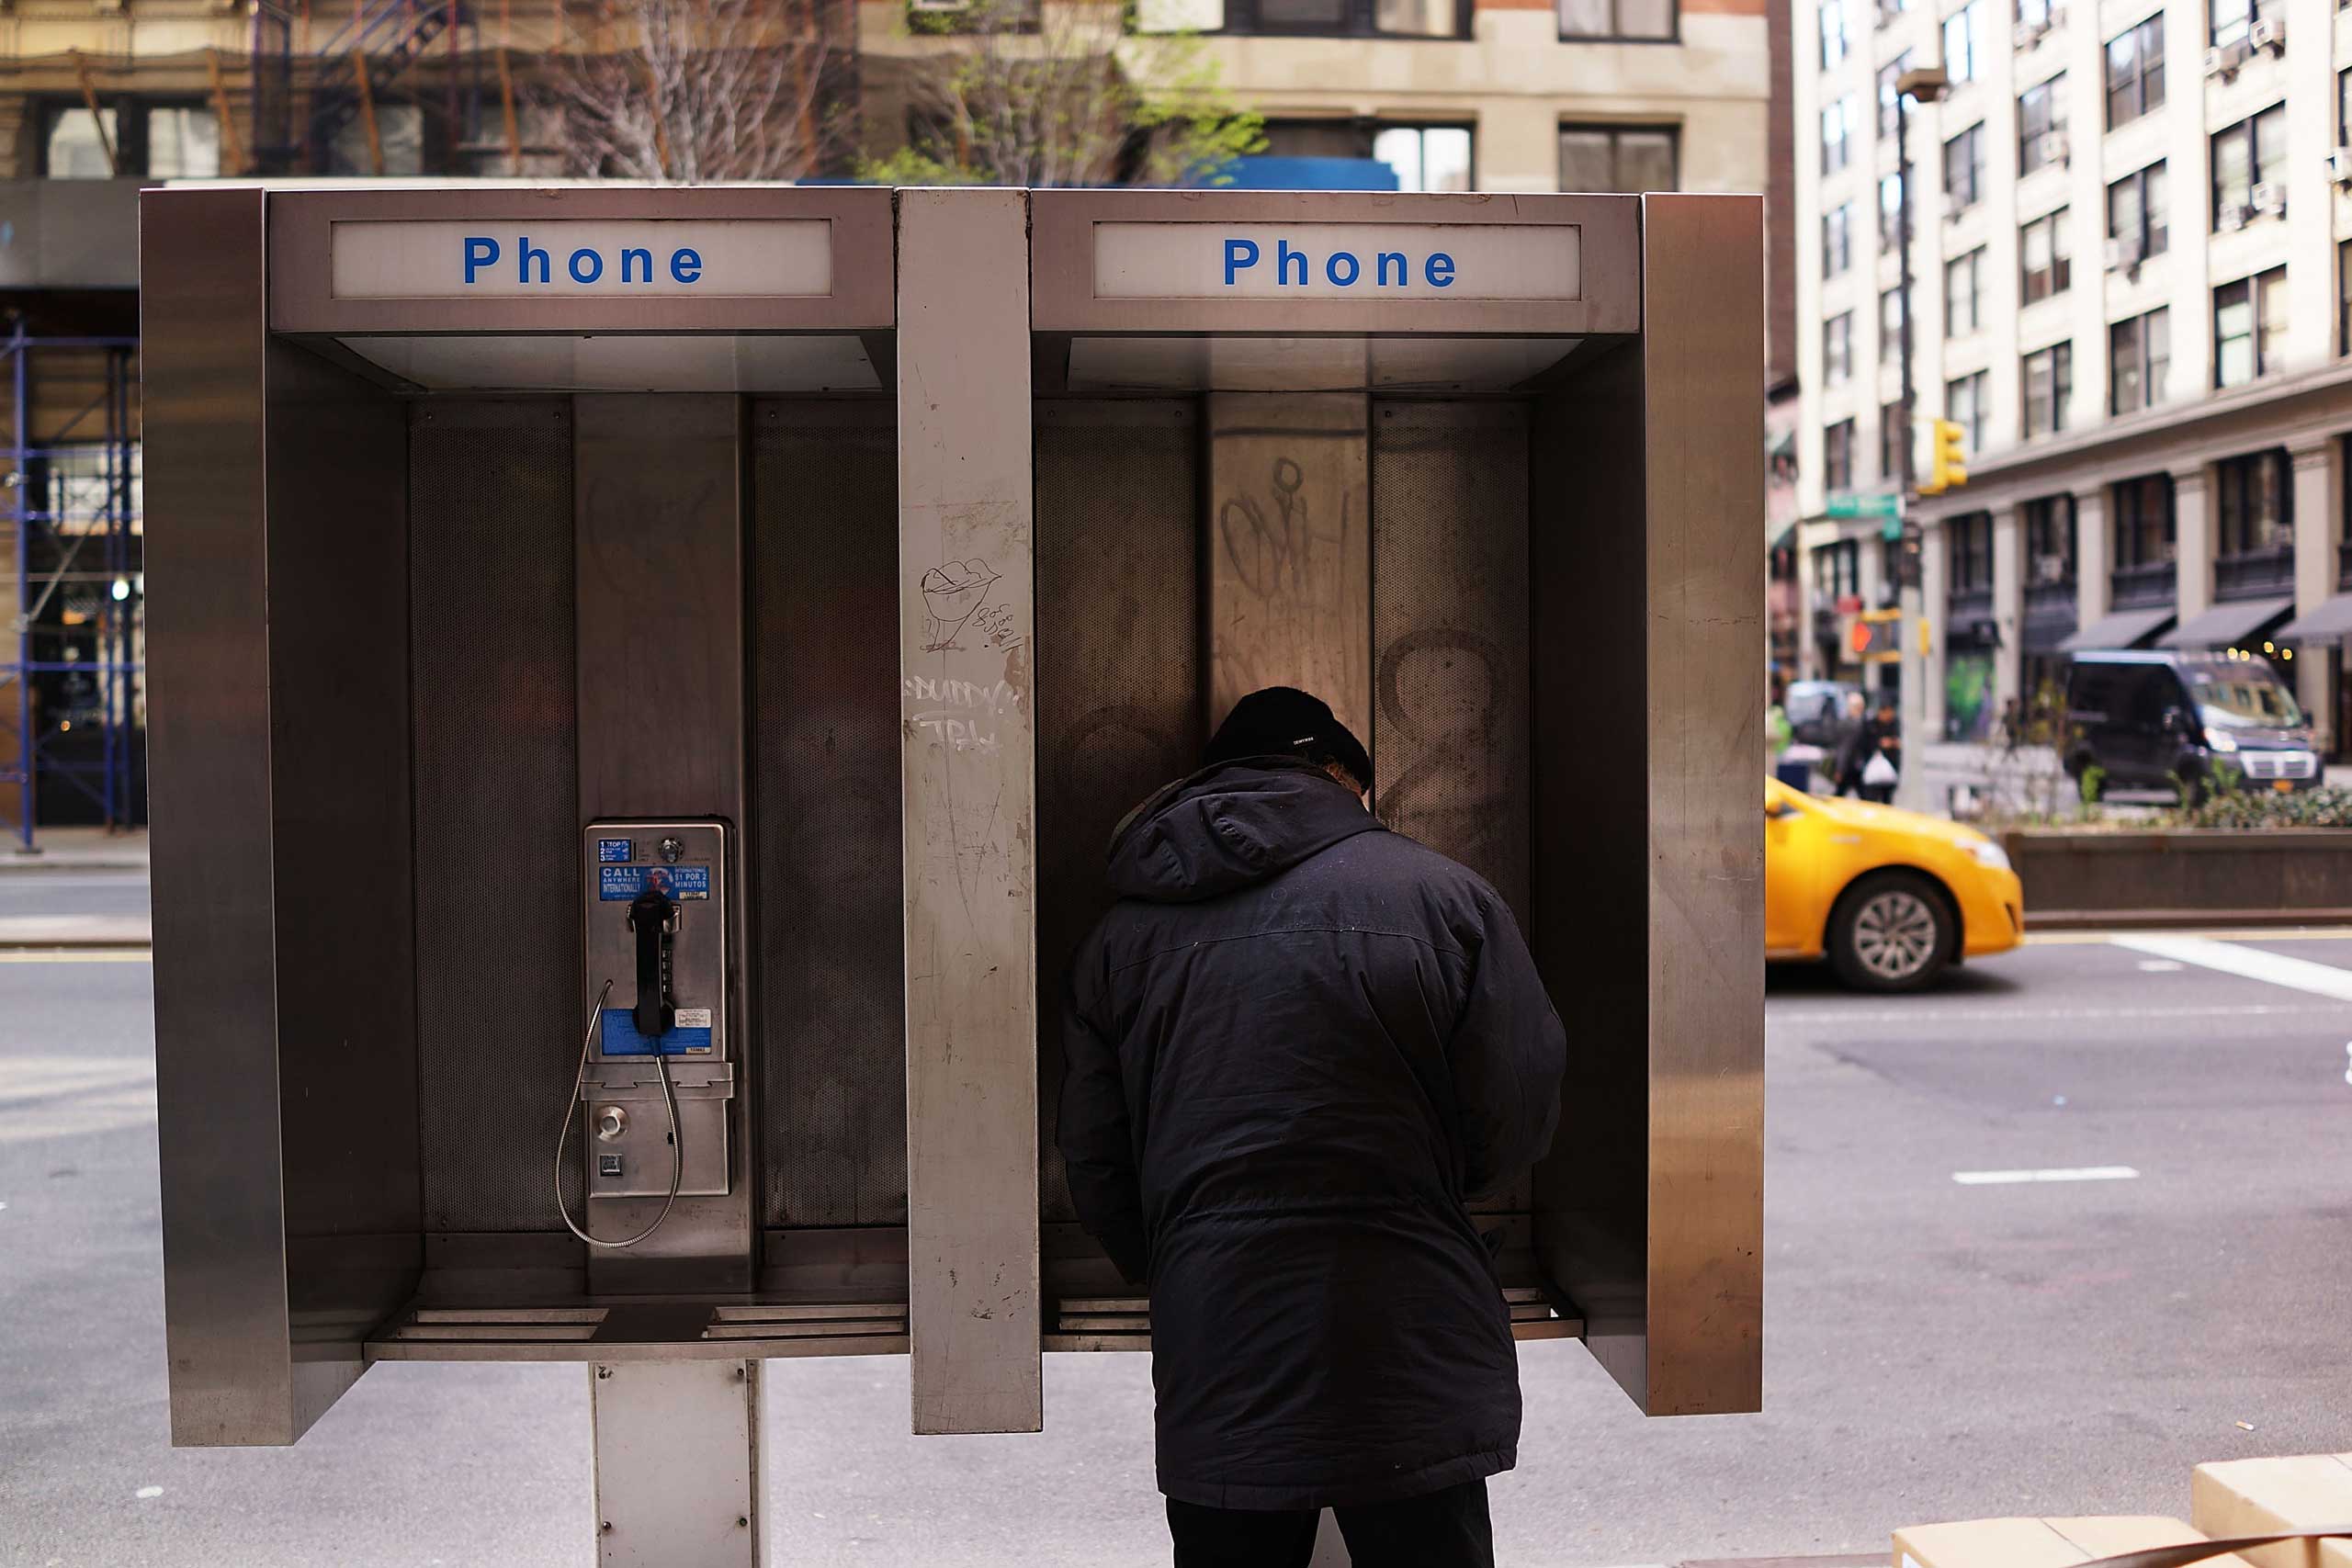 A man stands in a public phone booth on a Manhattan street on May 2, 2014 in New York City. (Spencer Platt—Getty Images)